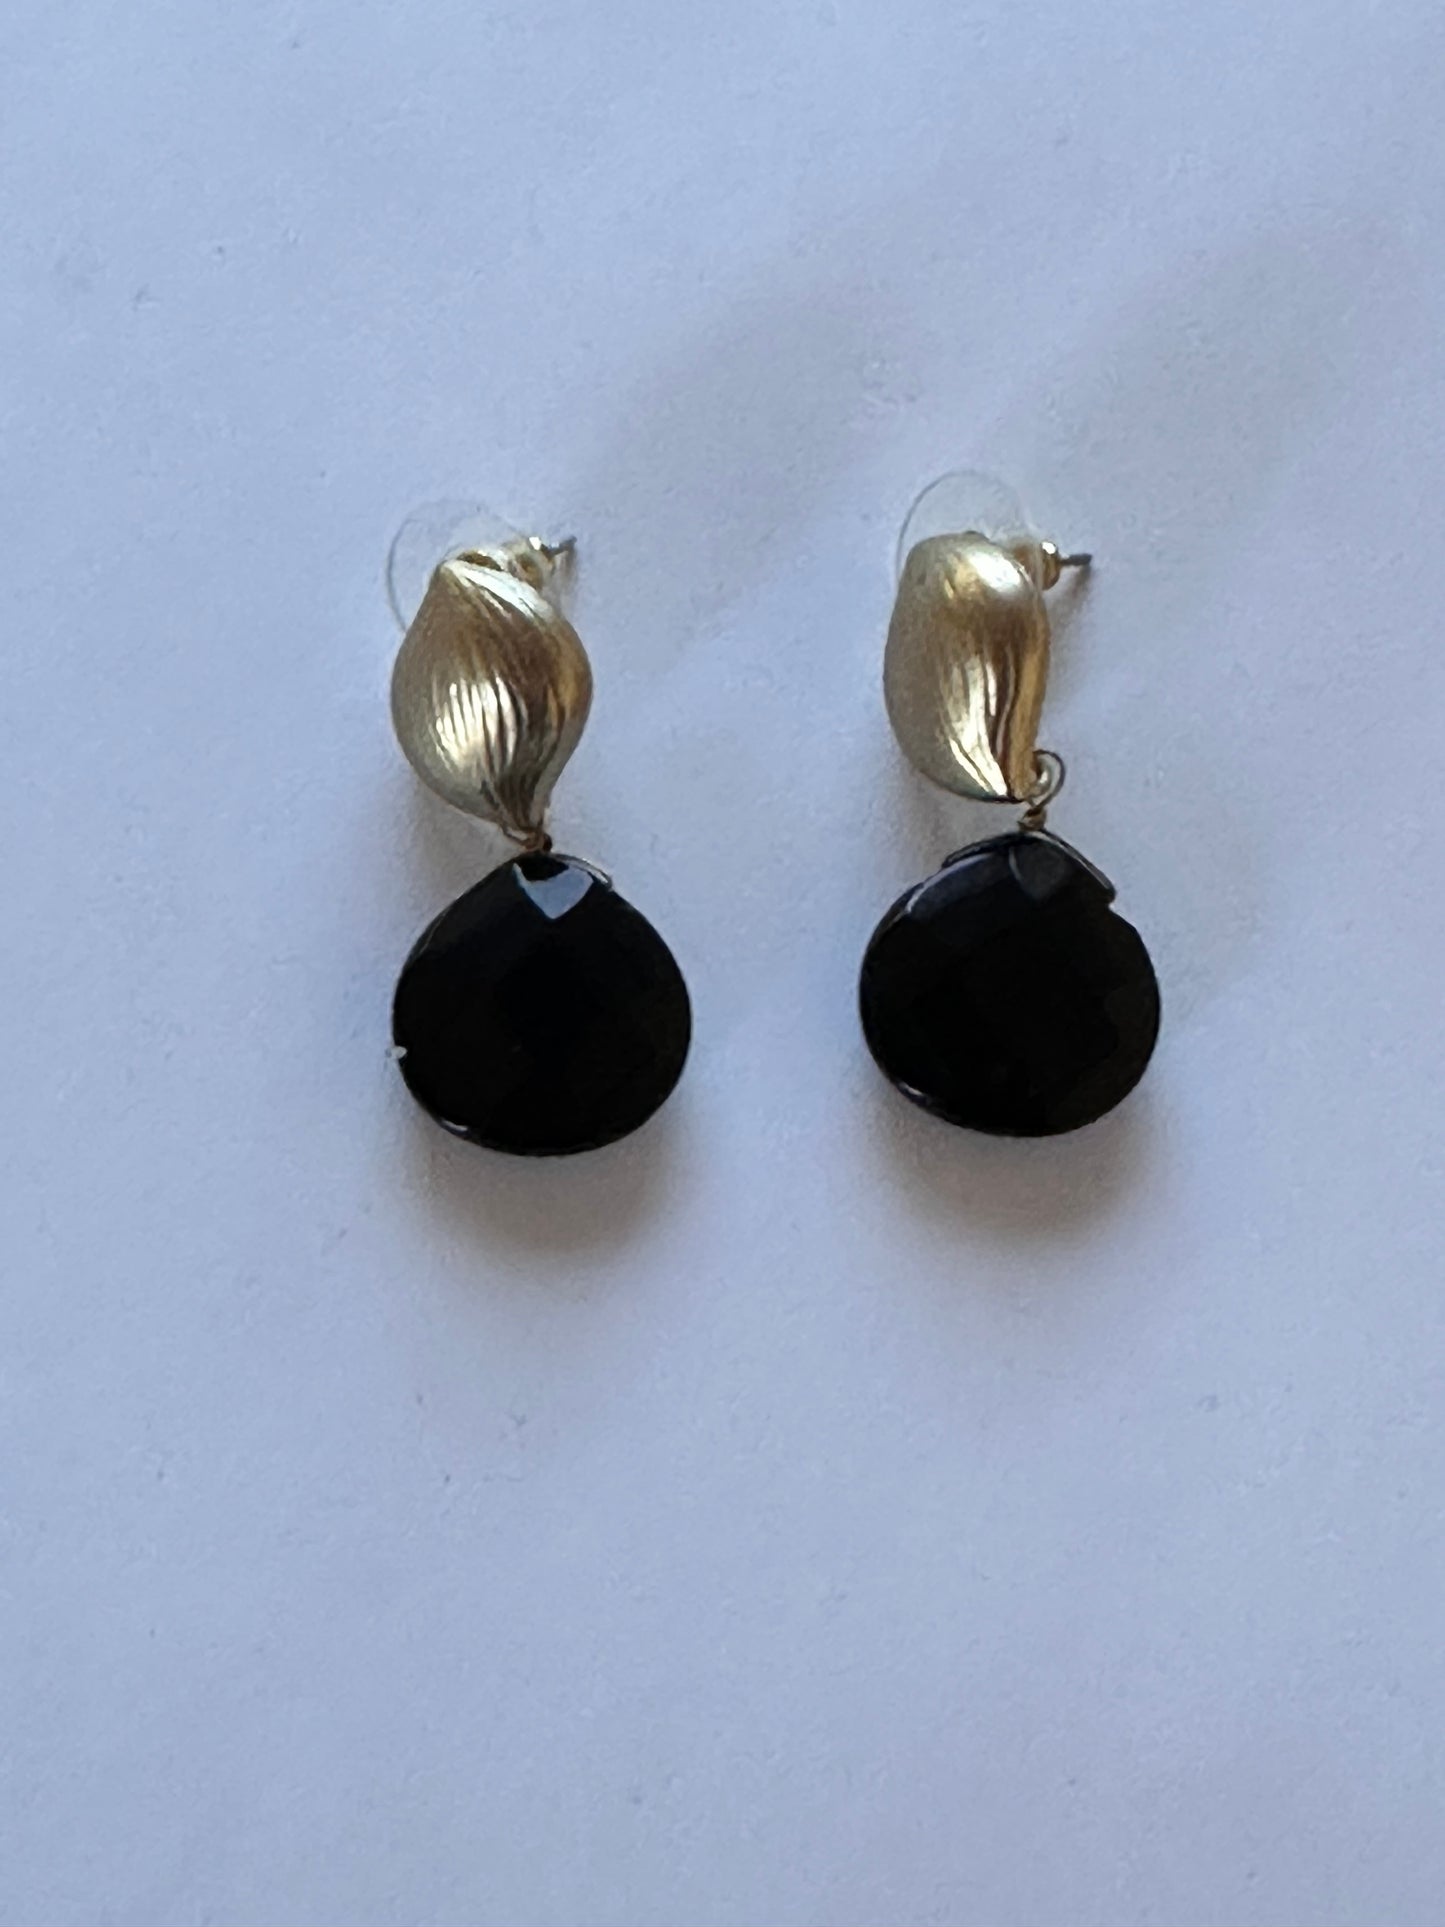 THE OFFICE: Angela's Earrings Collection